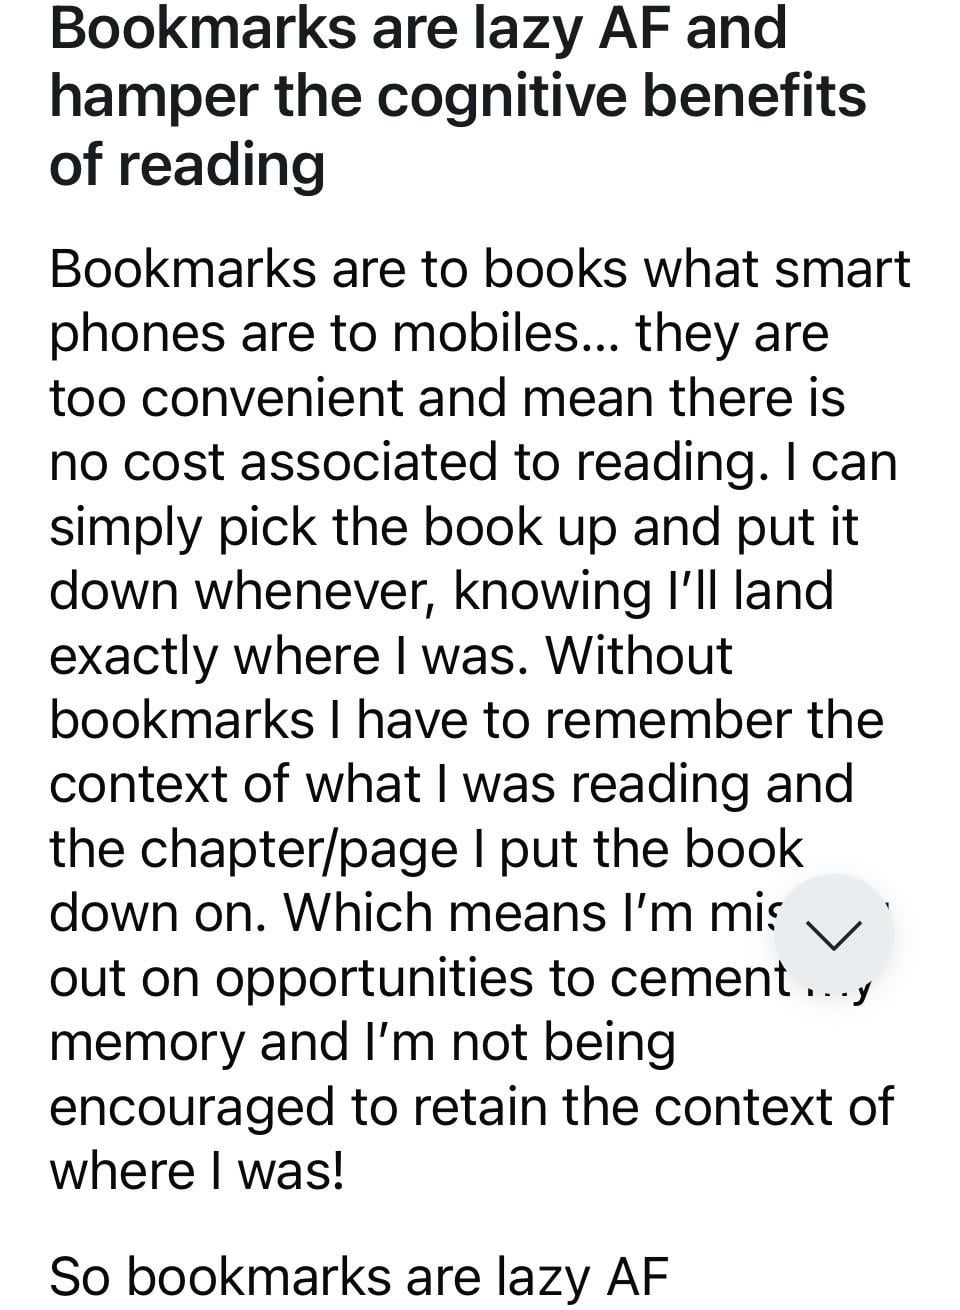 Down with bookmarks